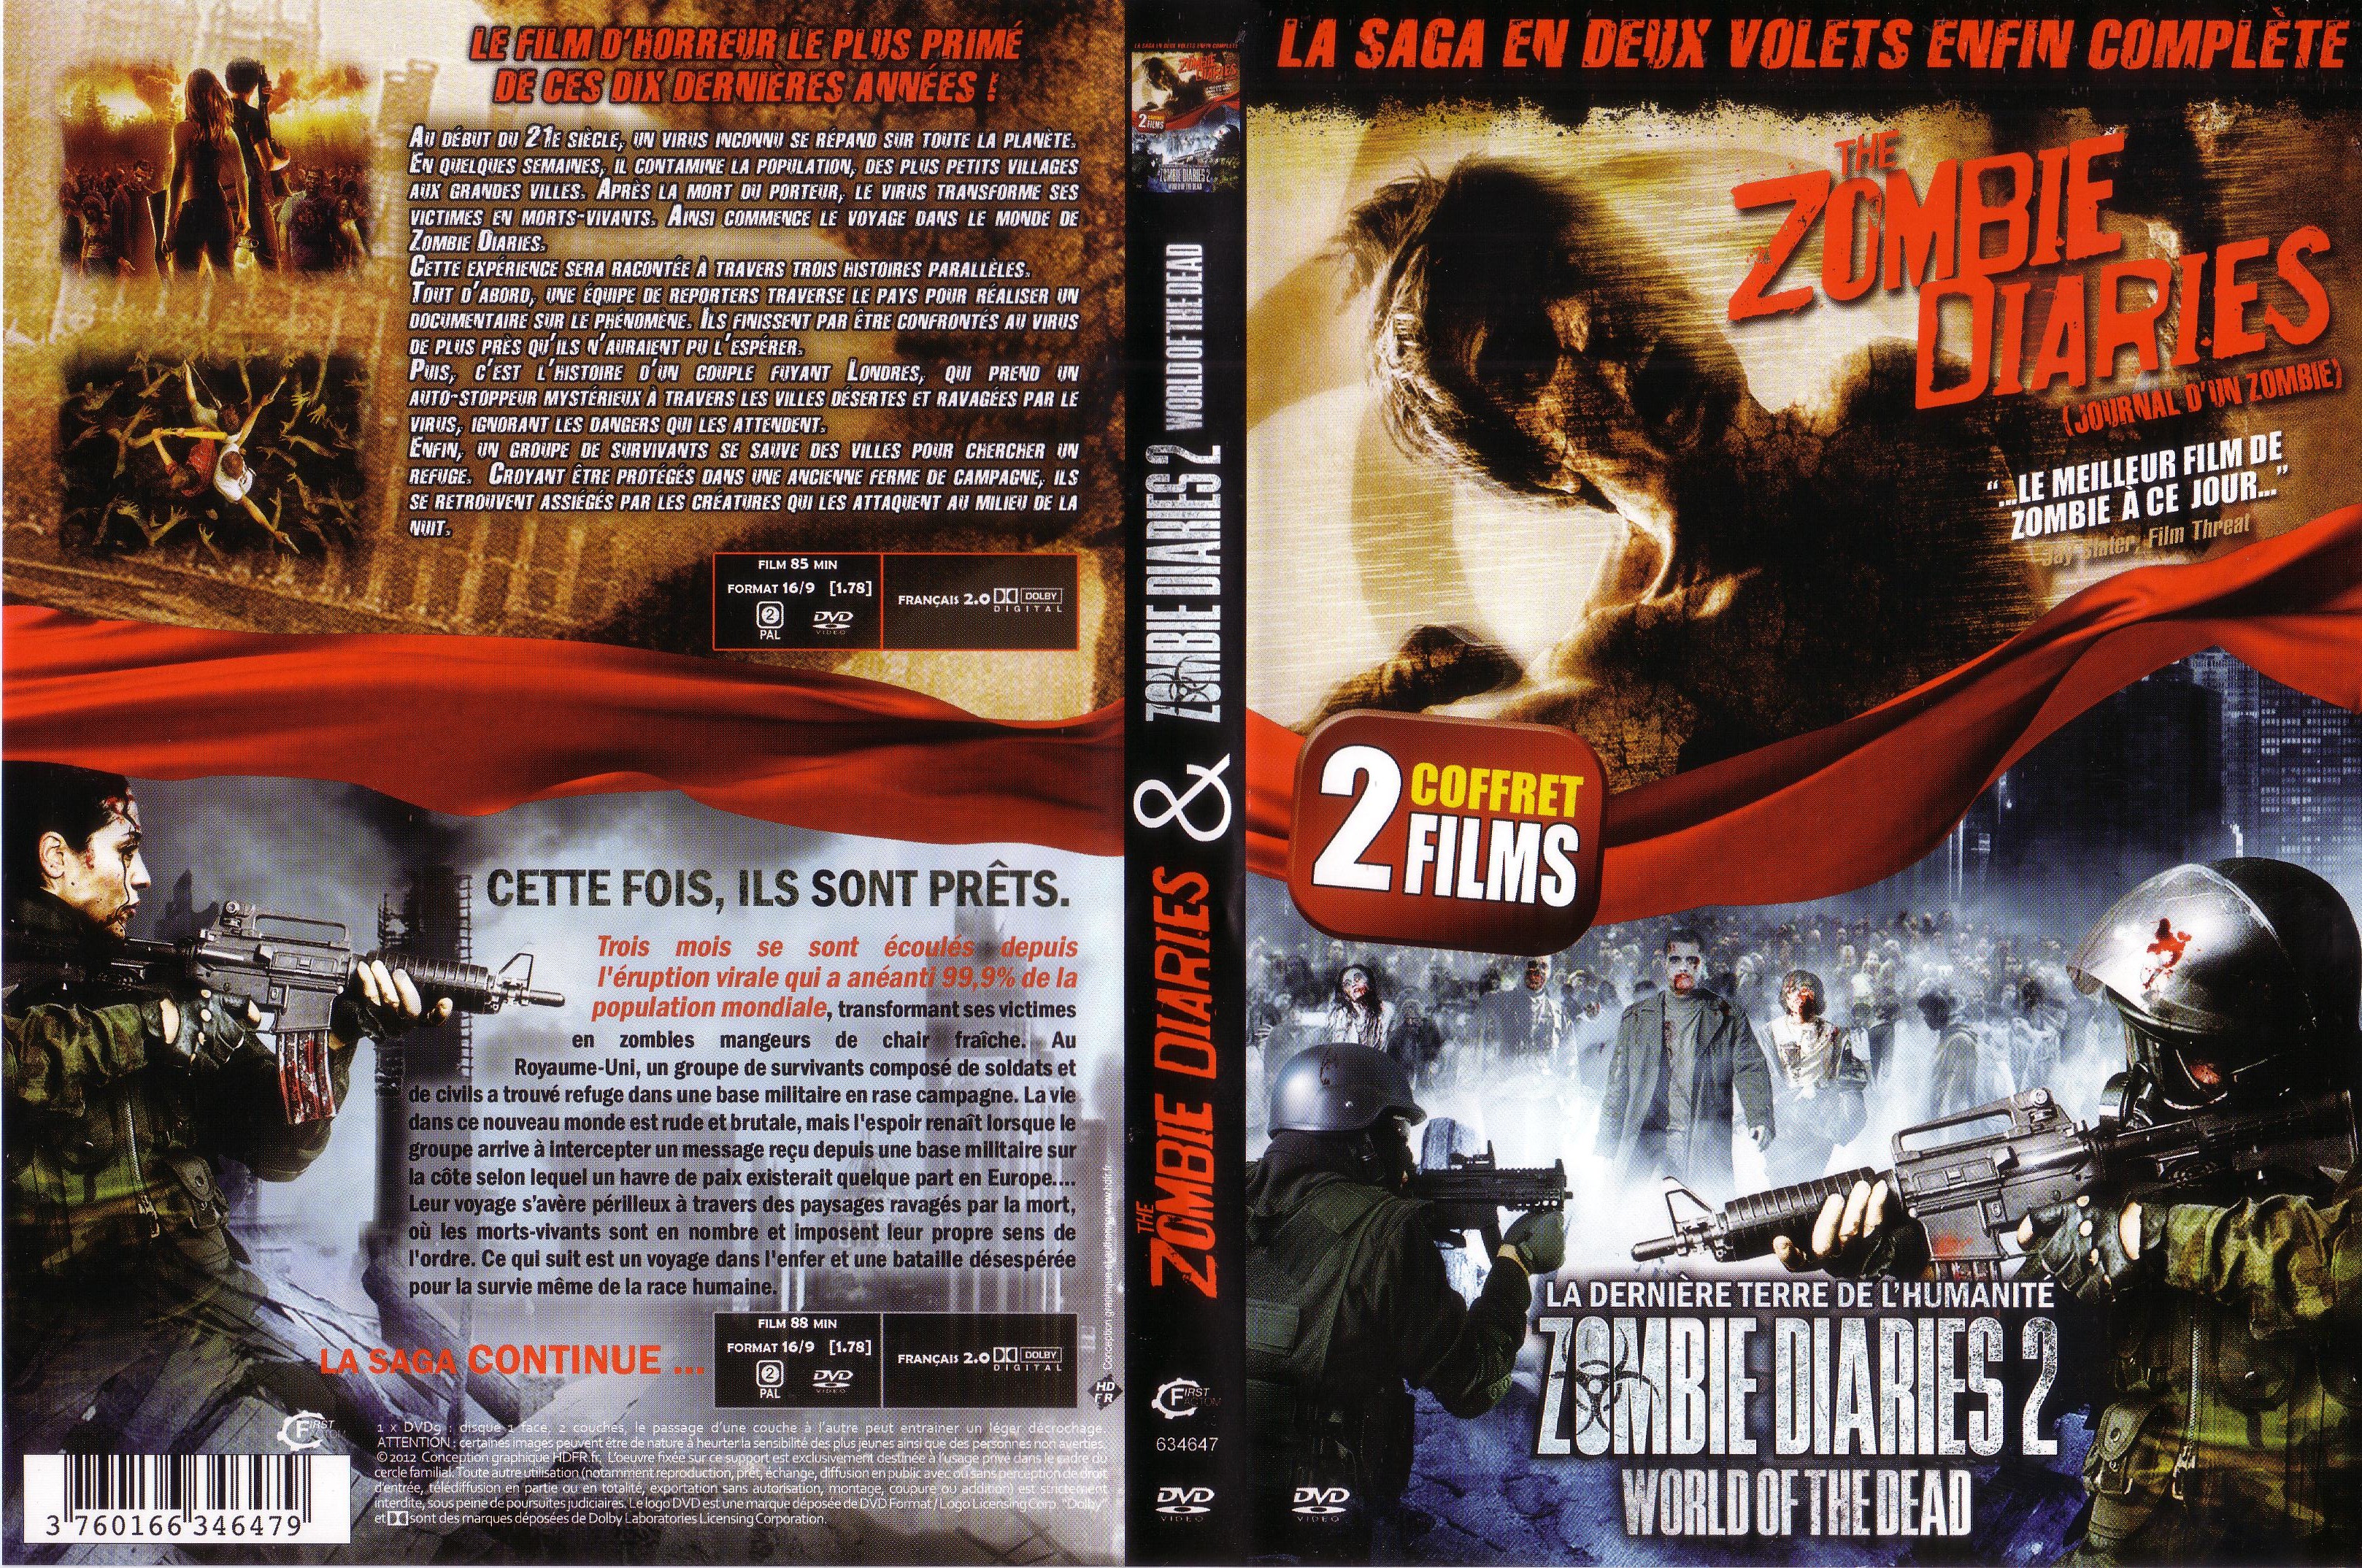 Jaquette DVD The zombie diaries 1+2